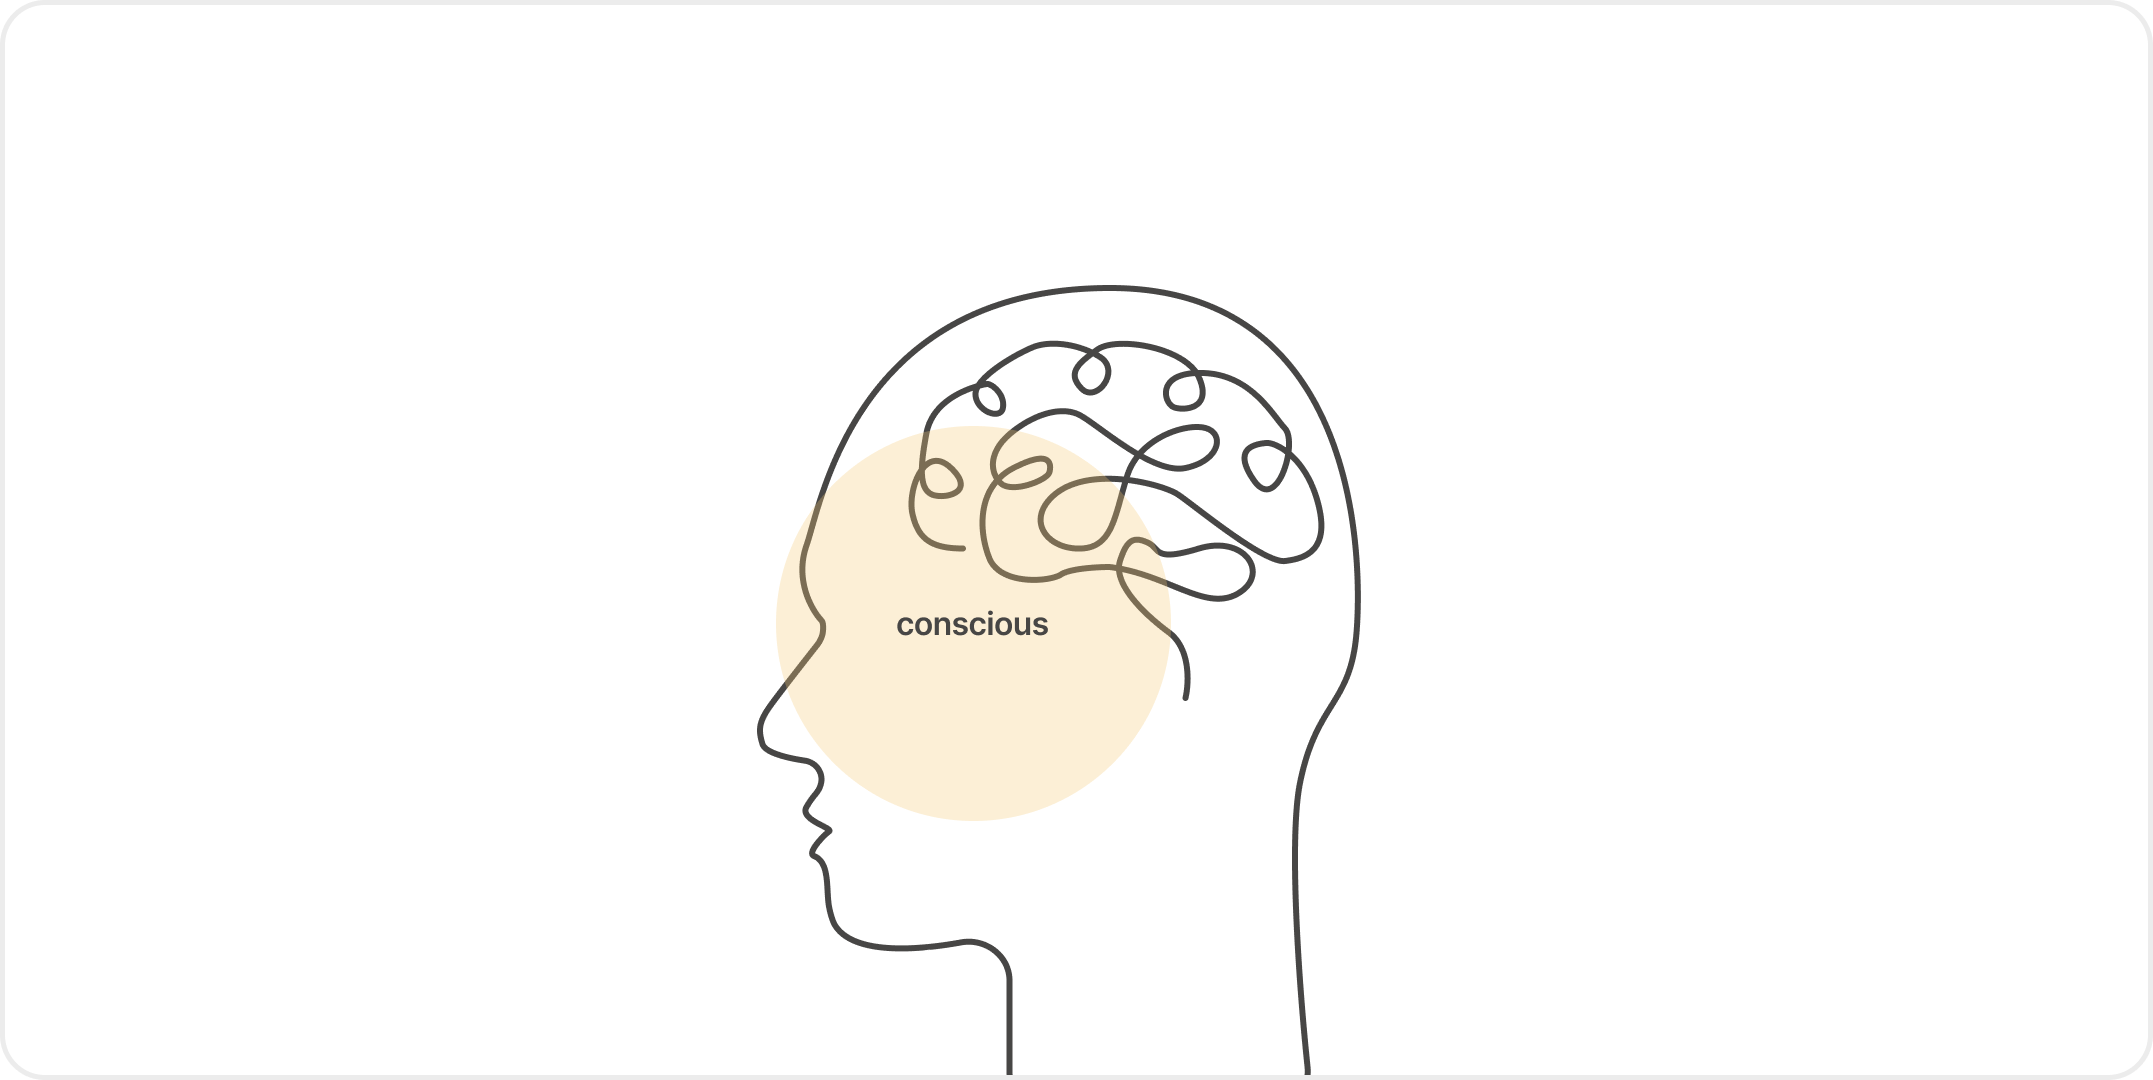 Illustration of the conscious mind